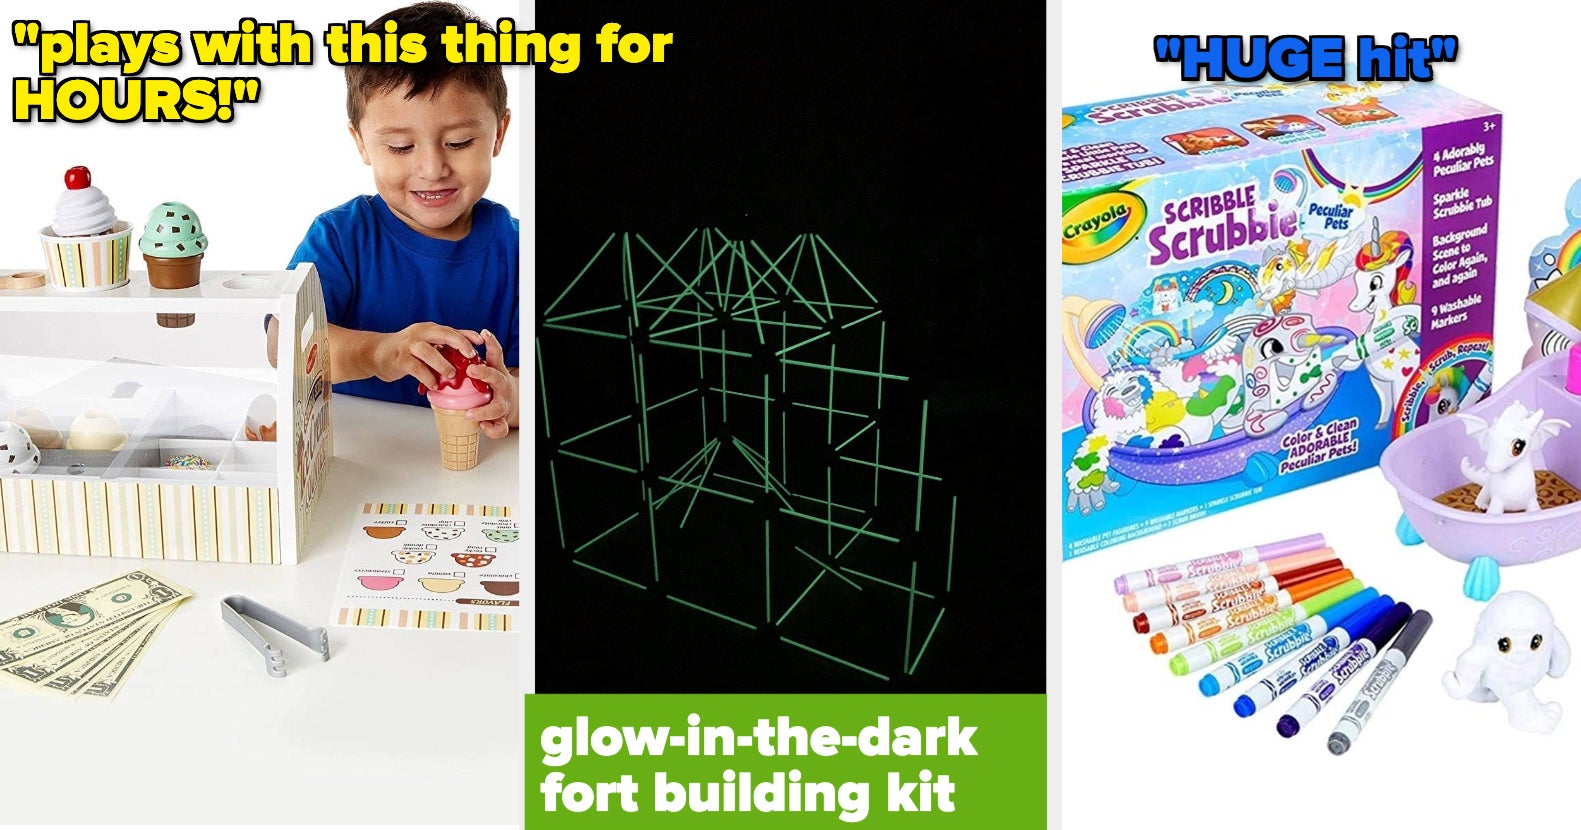 41 Toys That Reviewers Say Kept Kids Busy For Hours